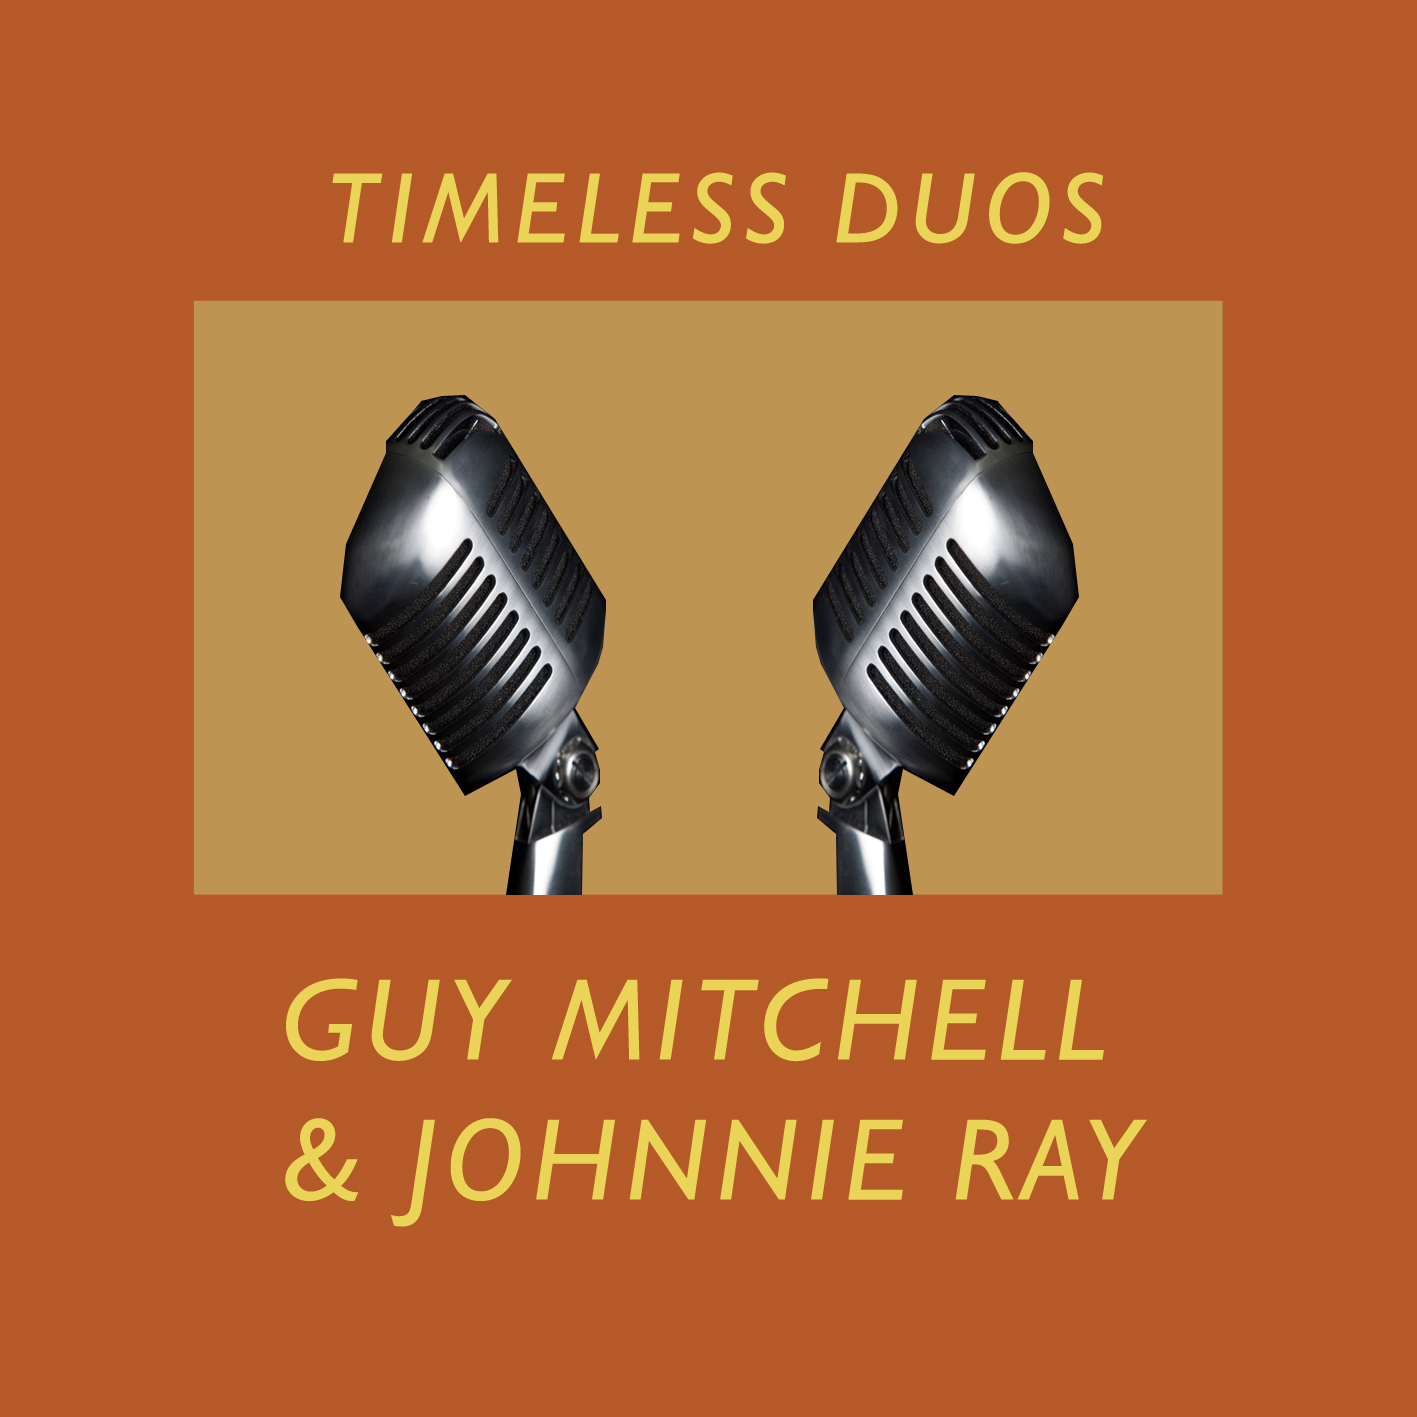 Timeless Duos: Guy Mitchell & Johnnie Ray